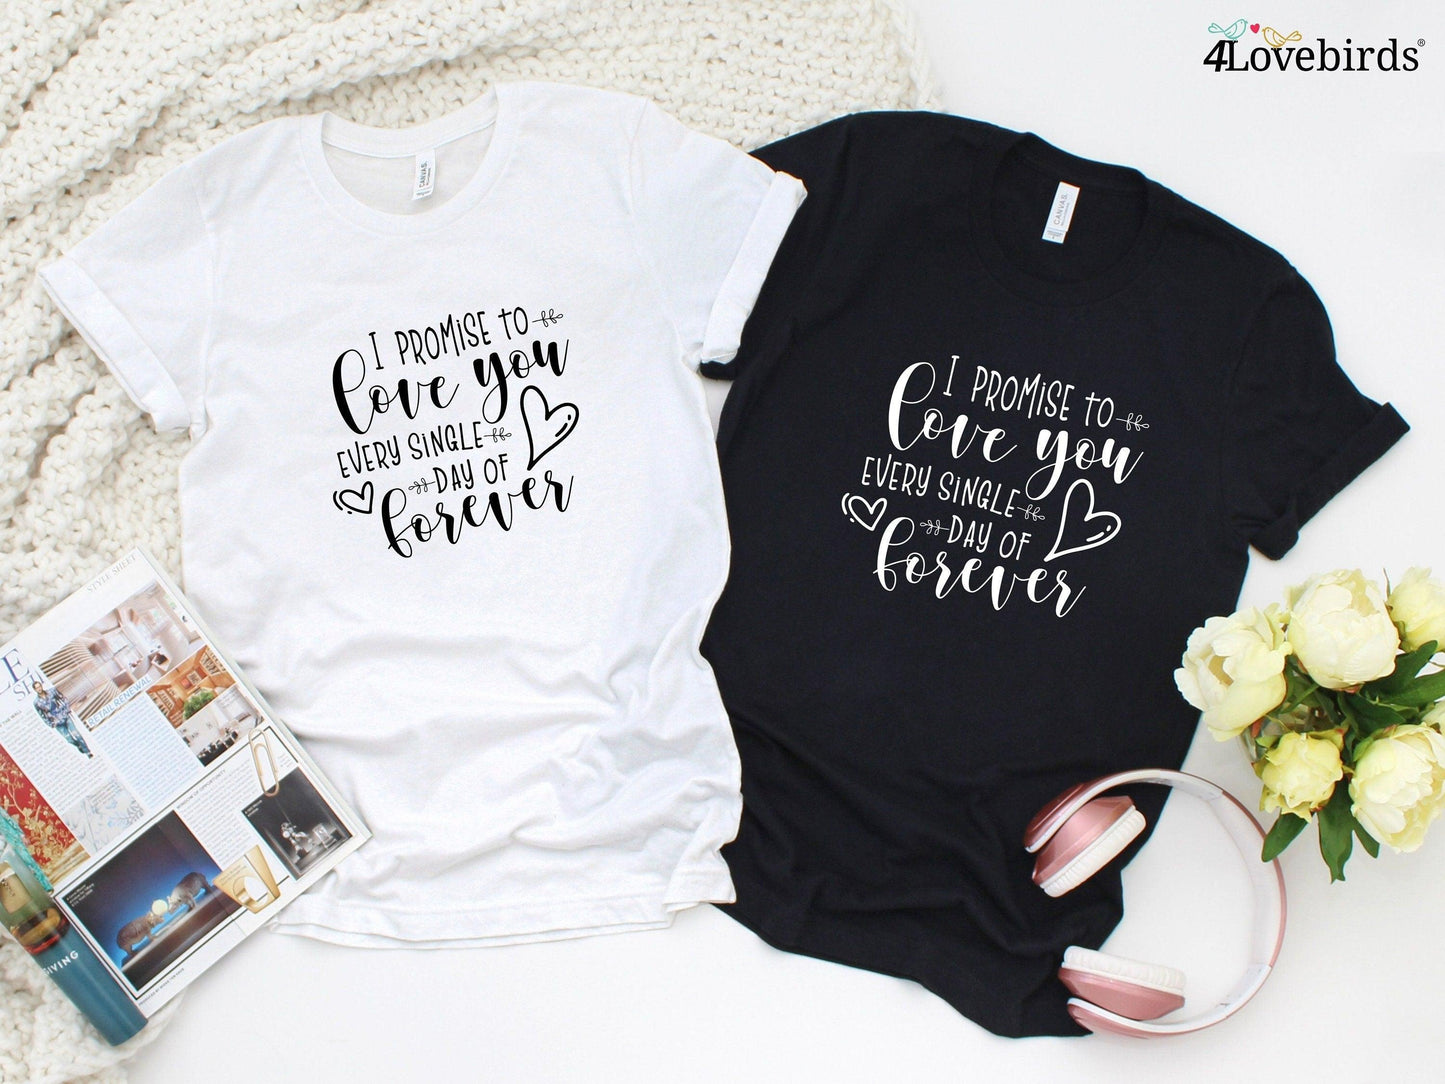 I promise to love you every single day of forever Hoodie, Lovers T-shirt, Gift for Couples, Valentine Sweatshirt, Eternal love promise - 4Lovebirds